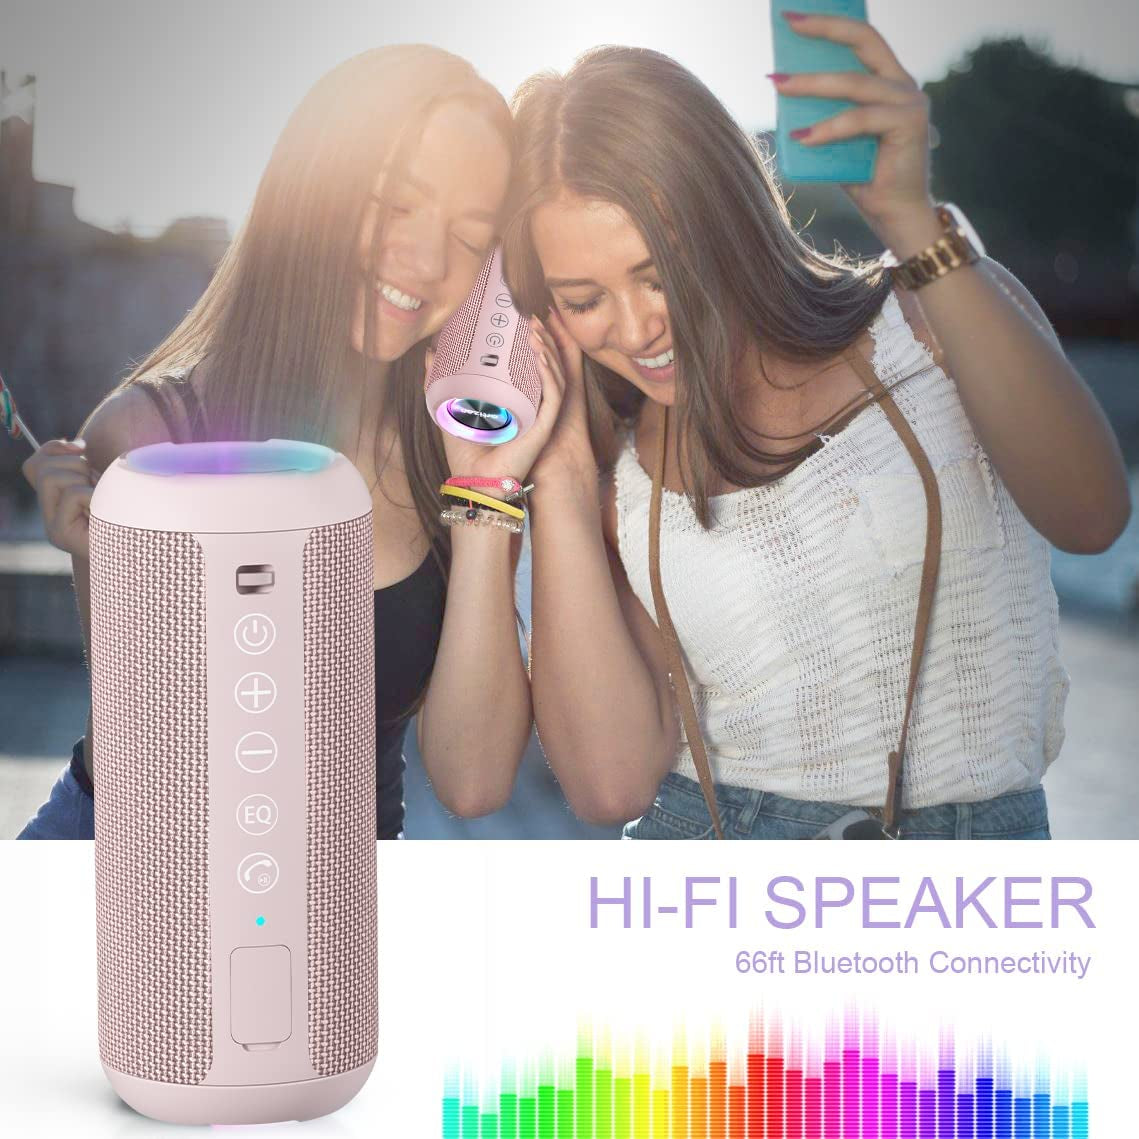 Portable Bluetooth Speaker, IPX7 Waterproof Wireless Speaker with 24W Loud Stereo Sound, Outdoor Sport Speakers with Bluetooth 5.0, 30H Playtime,66Ft Bluetooth Range,Tws Pairing for Home,Party